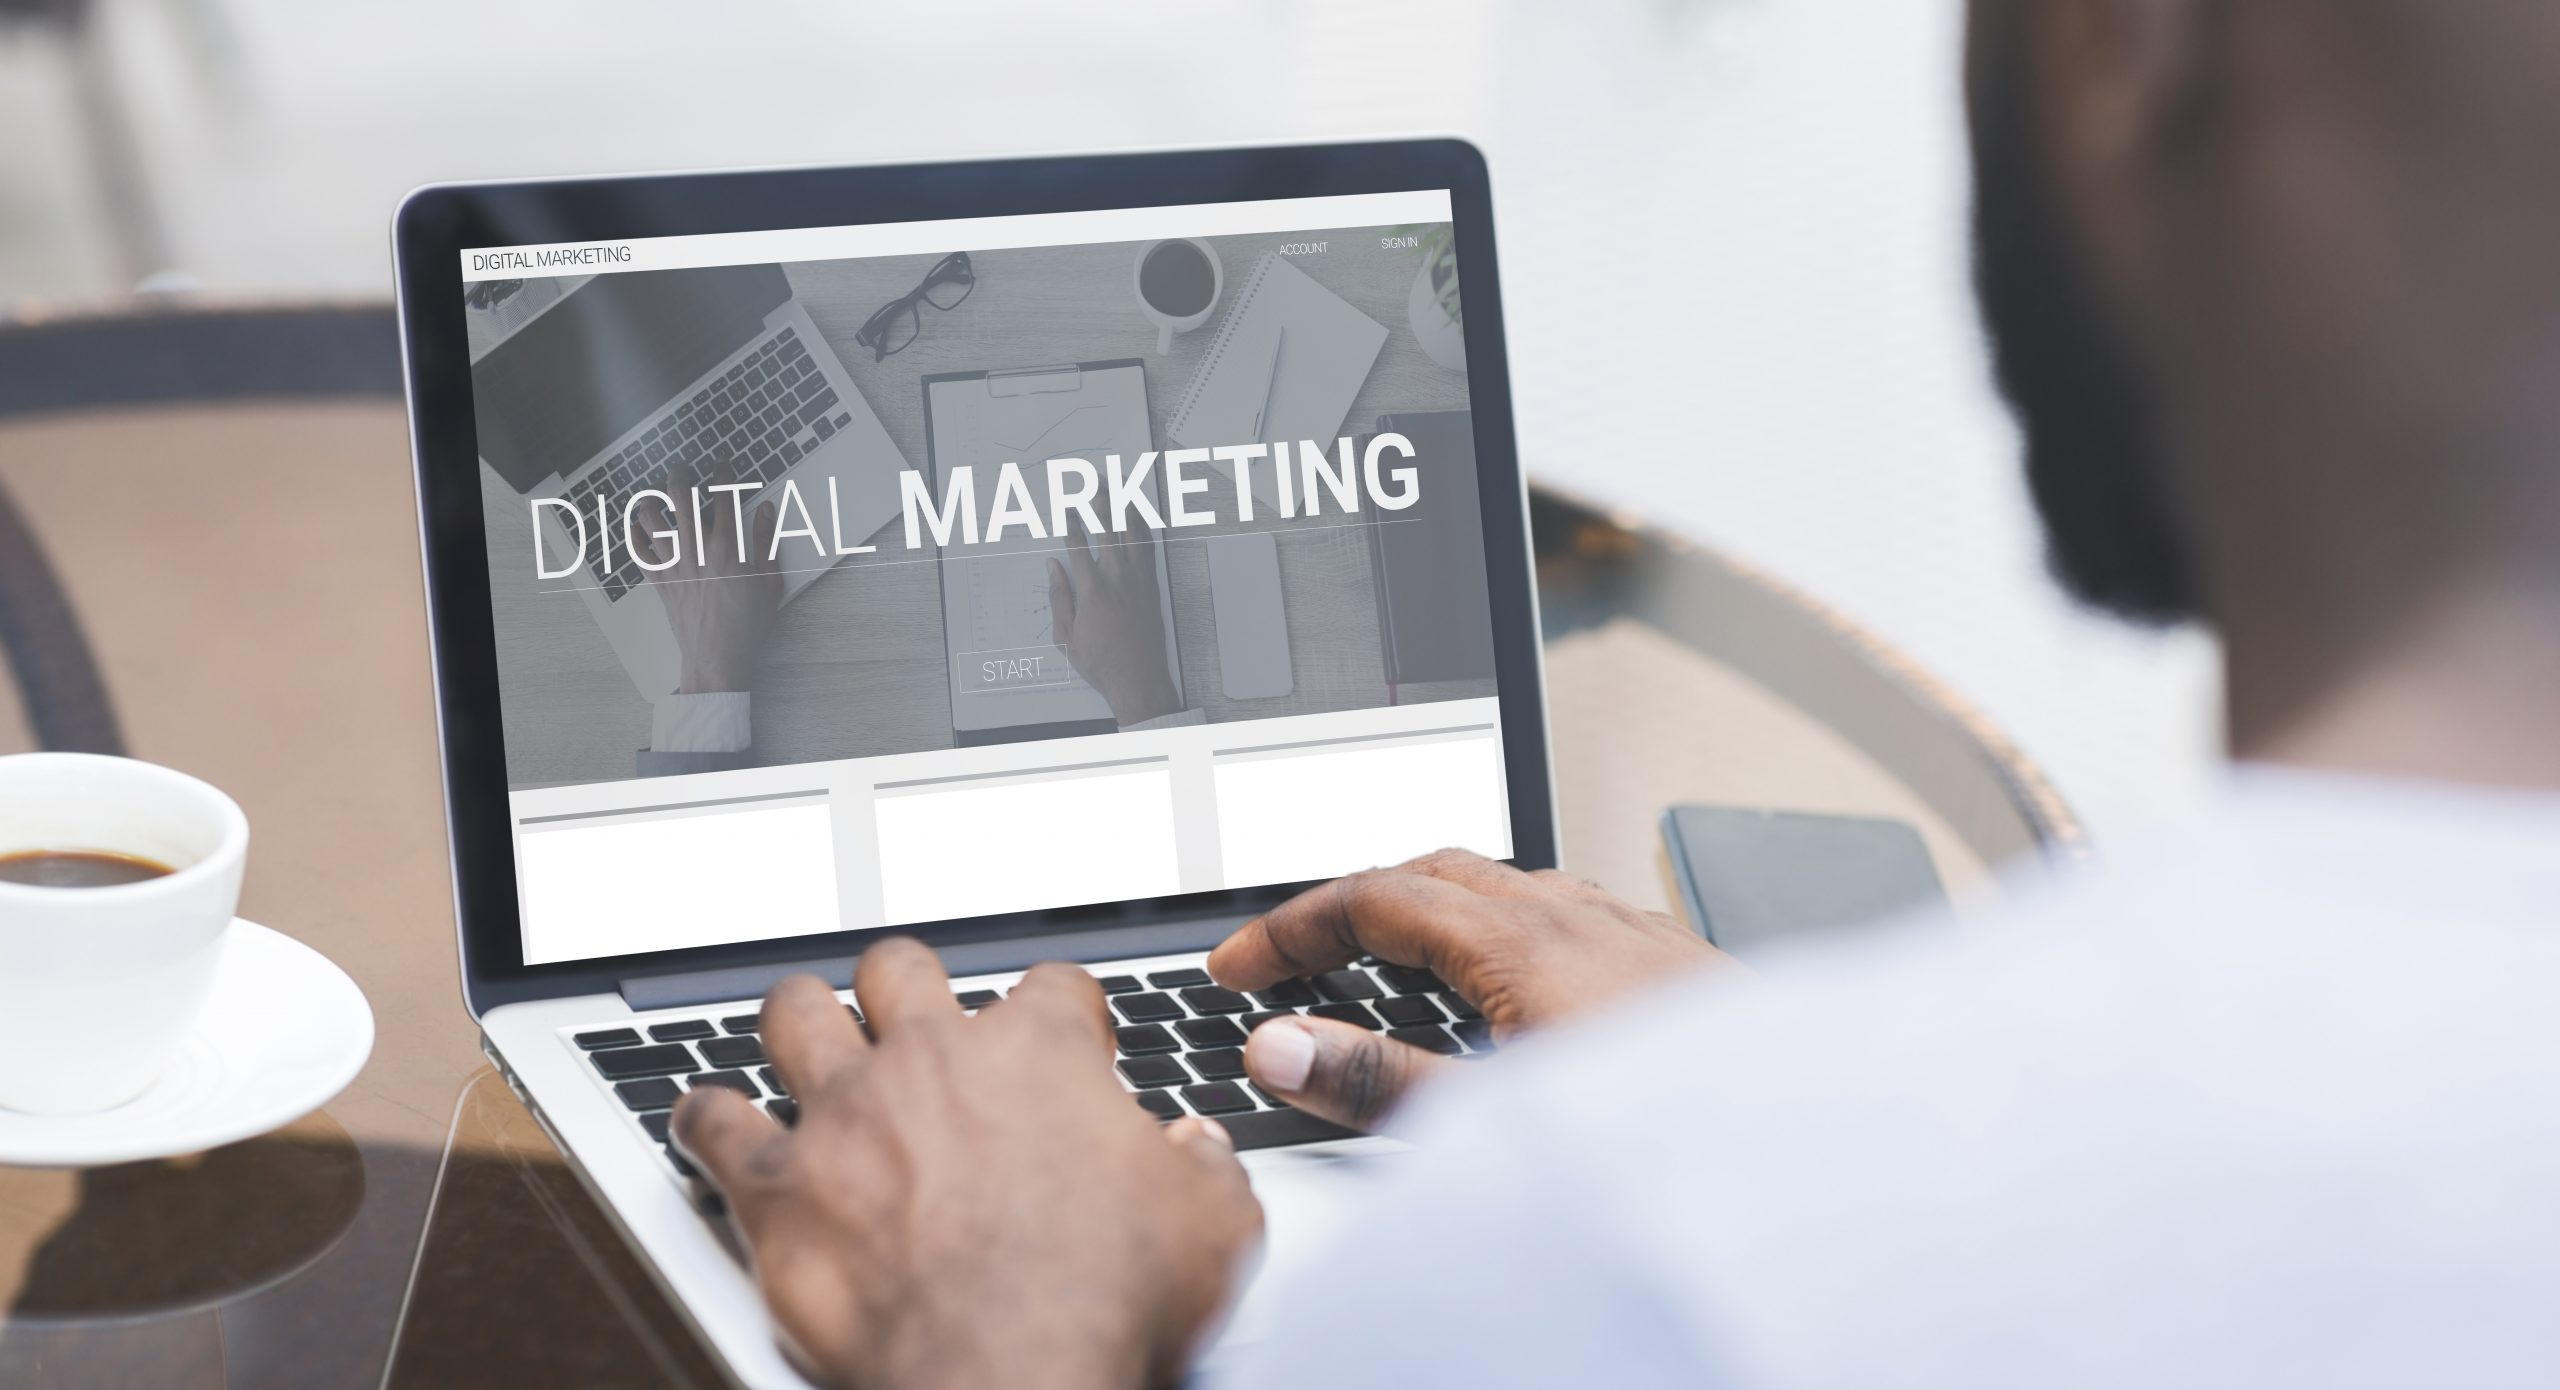 How Digitial Marketing Can Help Your School